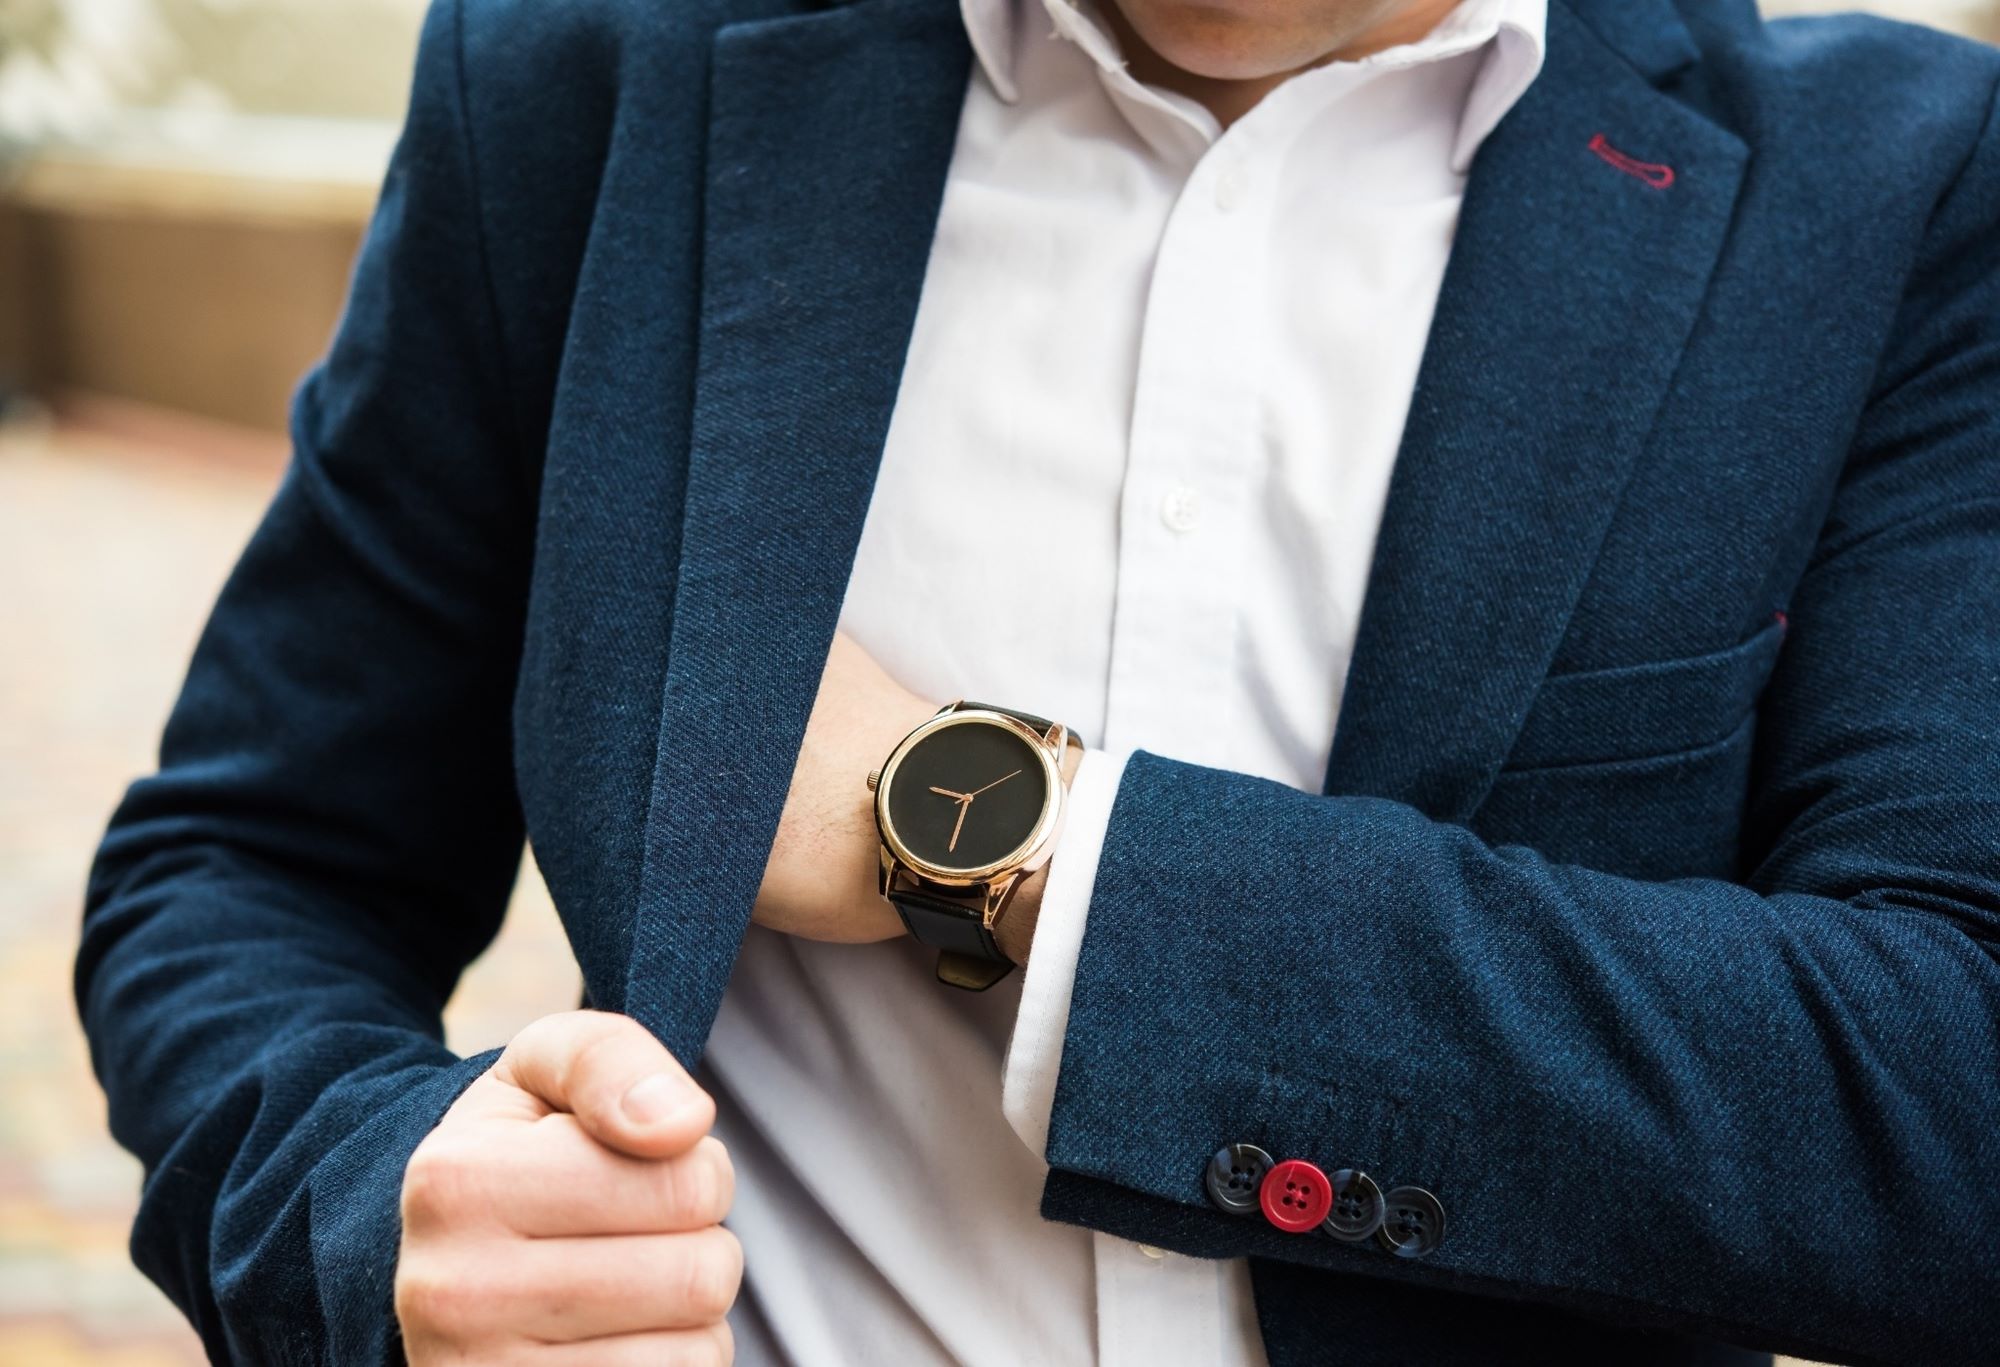 How To Wear Watch With Dress Shirt